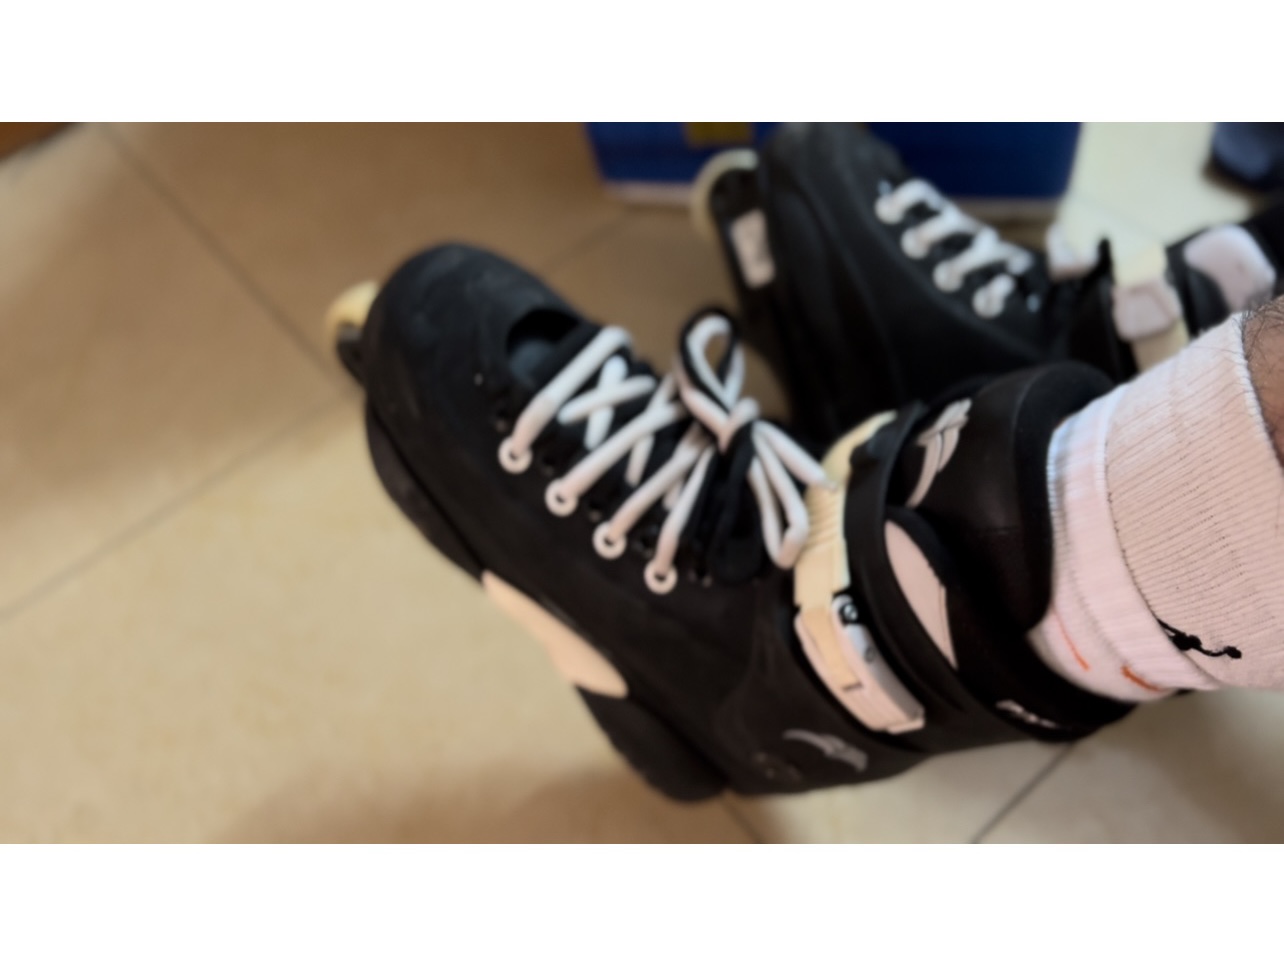 two pairs of socks with rollerskates